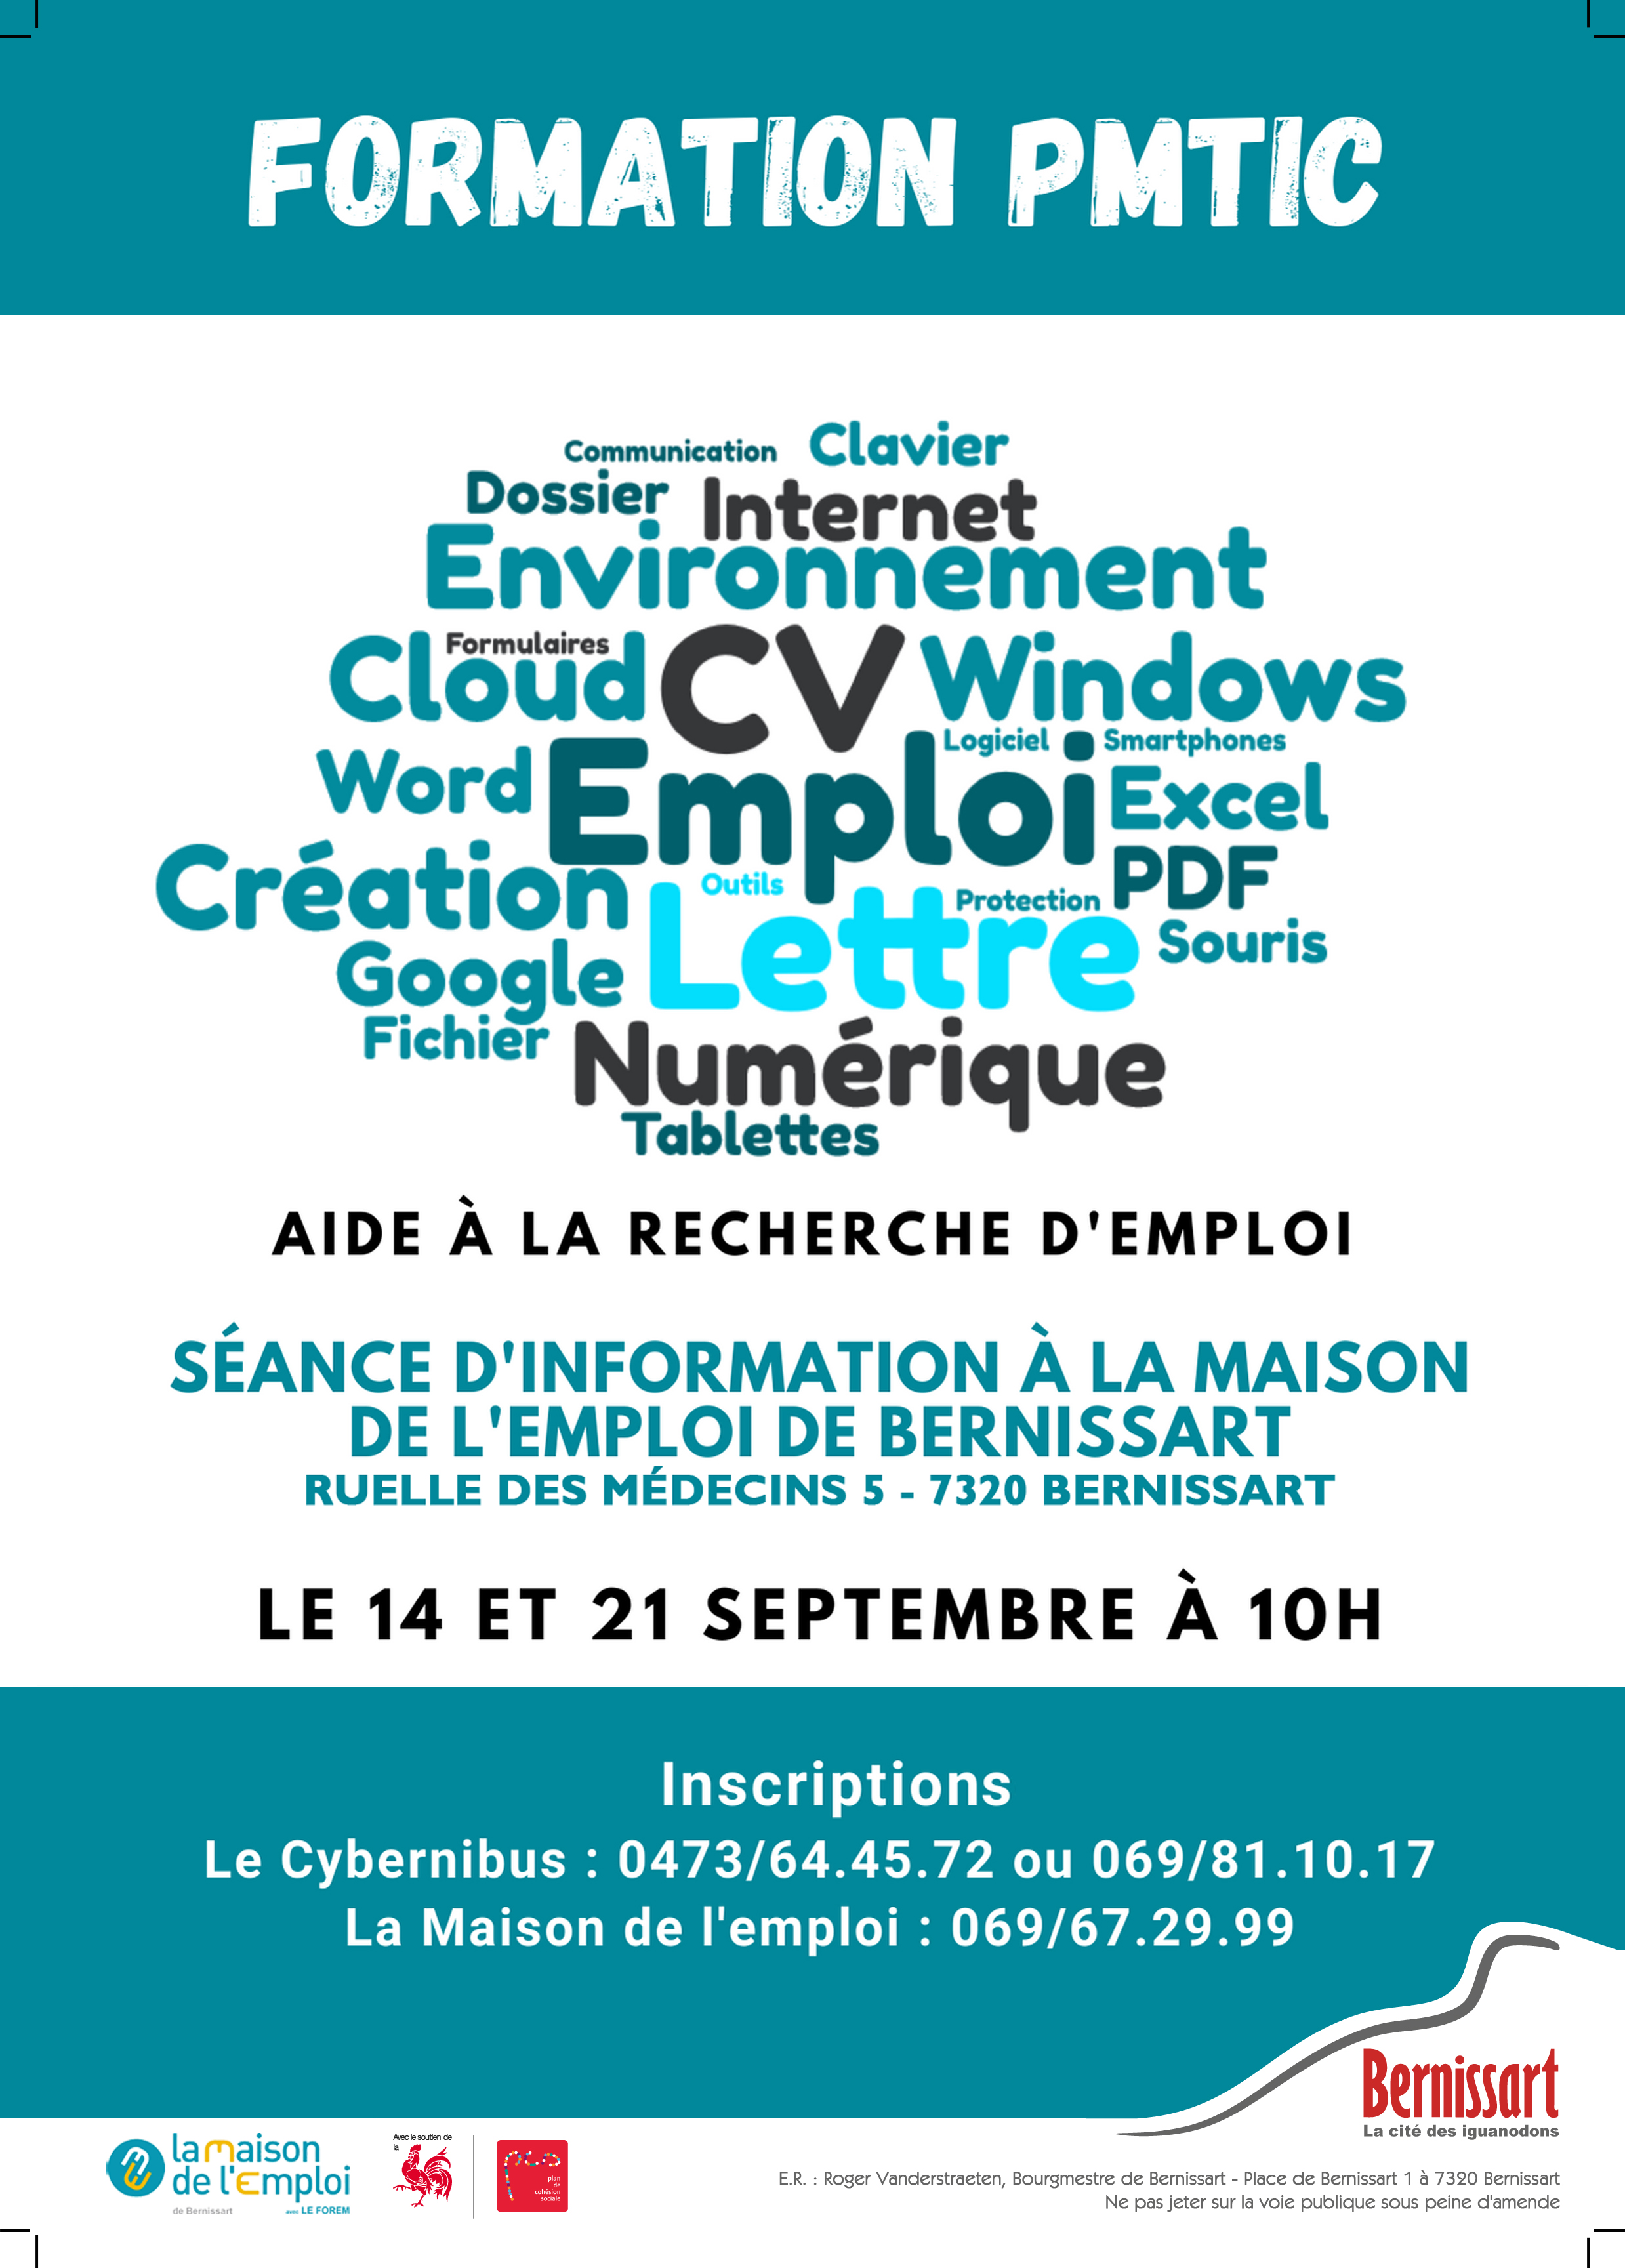 Seance d'information PMTIC